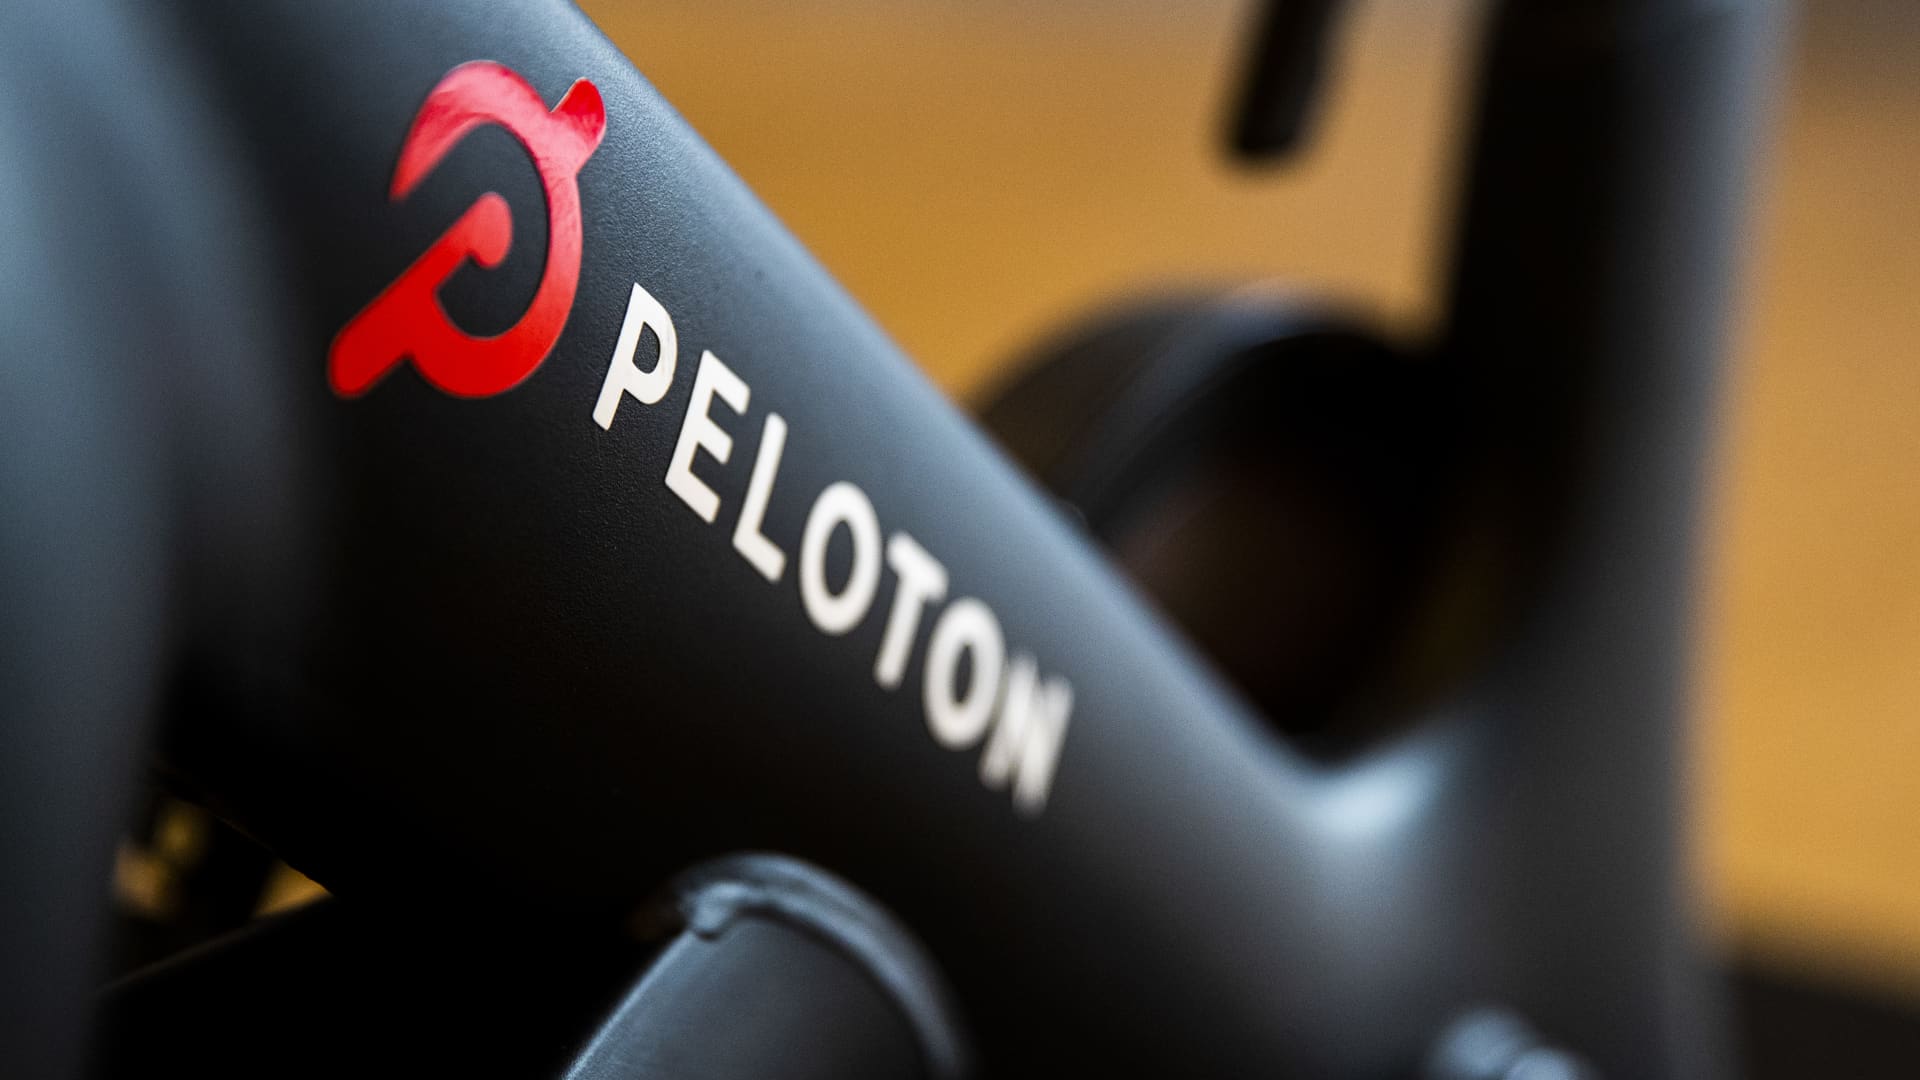 The peloton will outsource all production as part of its turnaround operation